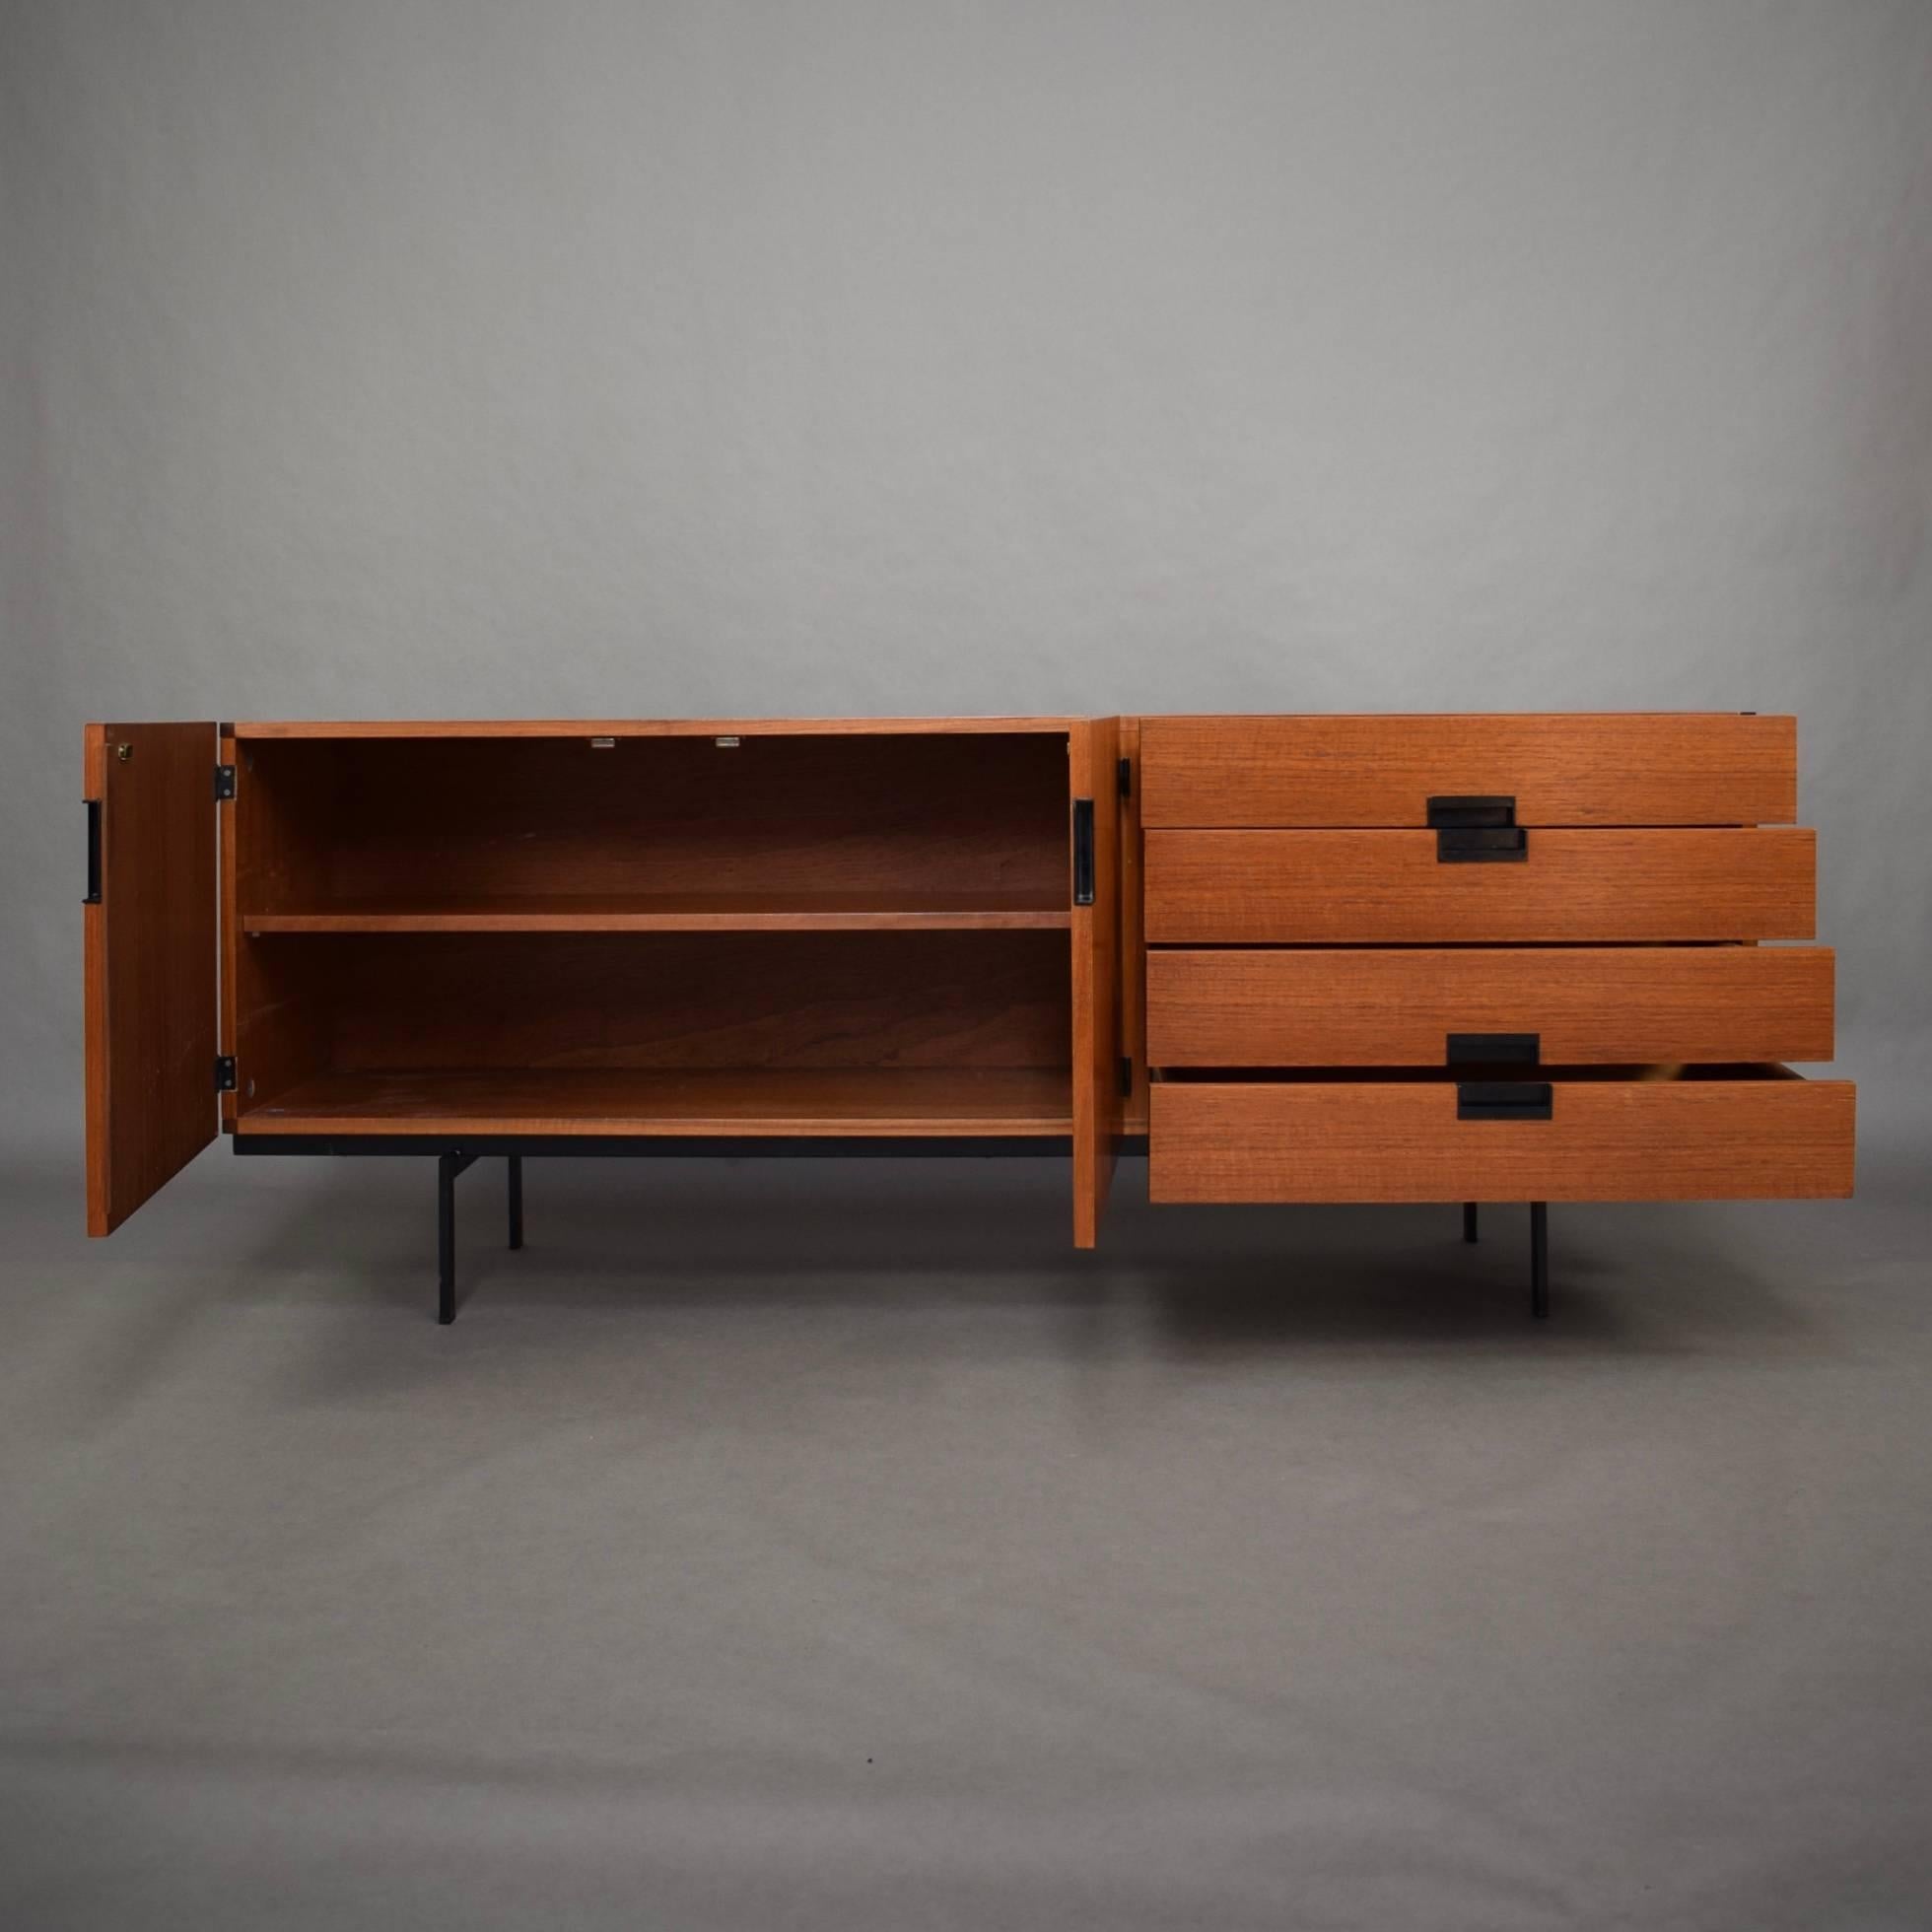 Iconic DU-04 Japanese series sideboard by Cees Braakman for Pastoe.
The Japanese sideboards are minimalistic and timeless in design and still as iconic as they are beautiful.
The typical Braakman drawers are made of bent teak plywood so they can